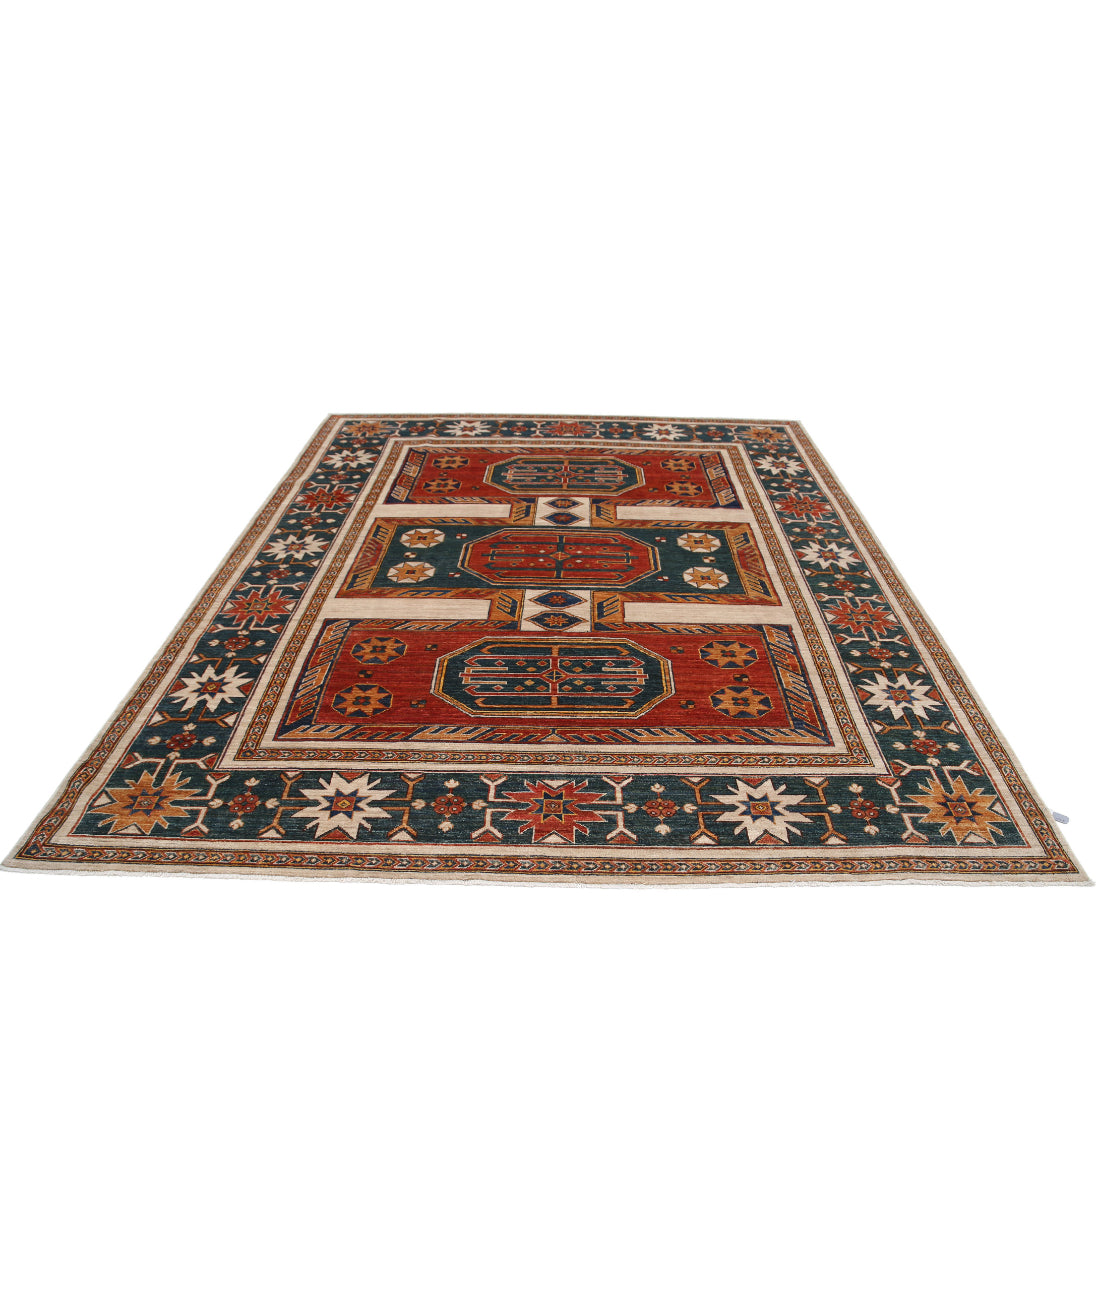 Hand Knotted Nomadic Caucasian Humna Wool Rug - 8'3'' x 9'9'' 8'3'' x 9'9'' (248 X 293) / Ivory / N/A